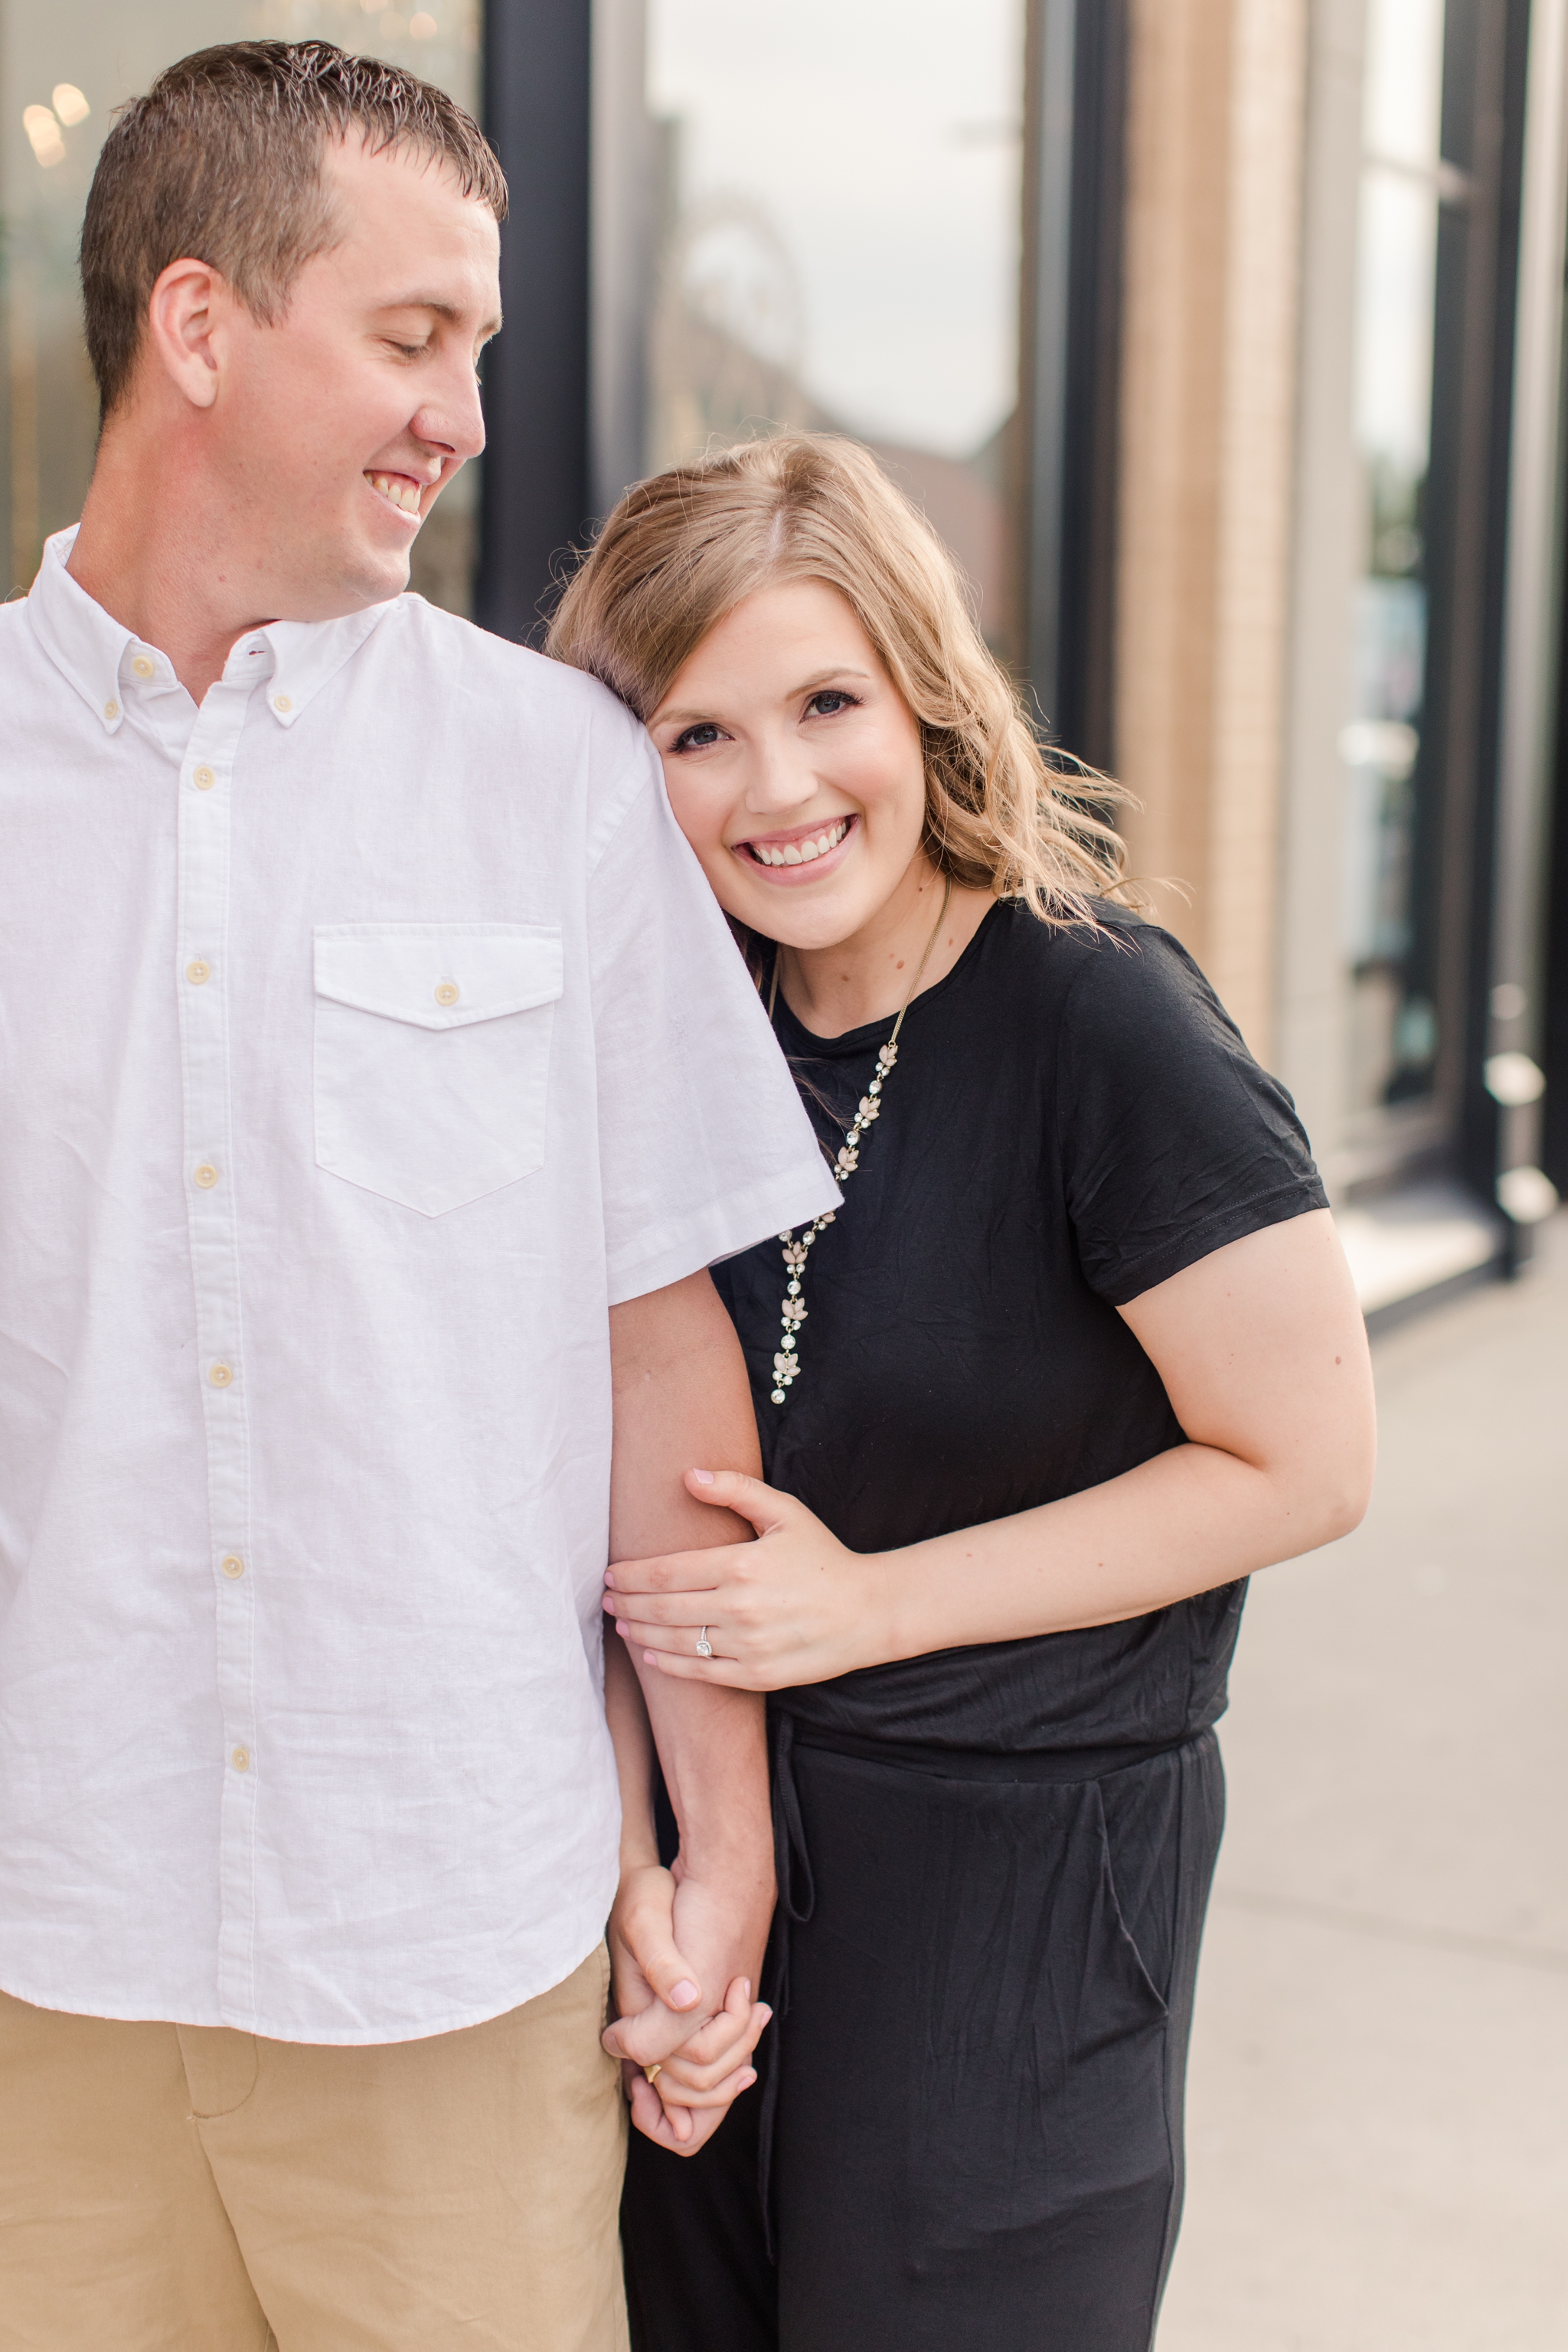 Downtown Fargo Engagement Photos, Brittney and Caleb